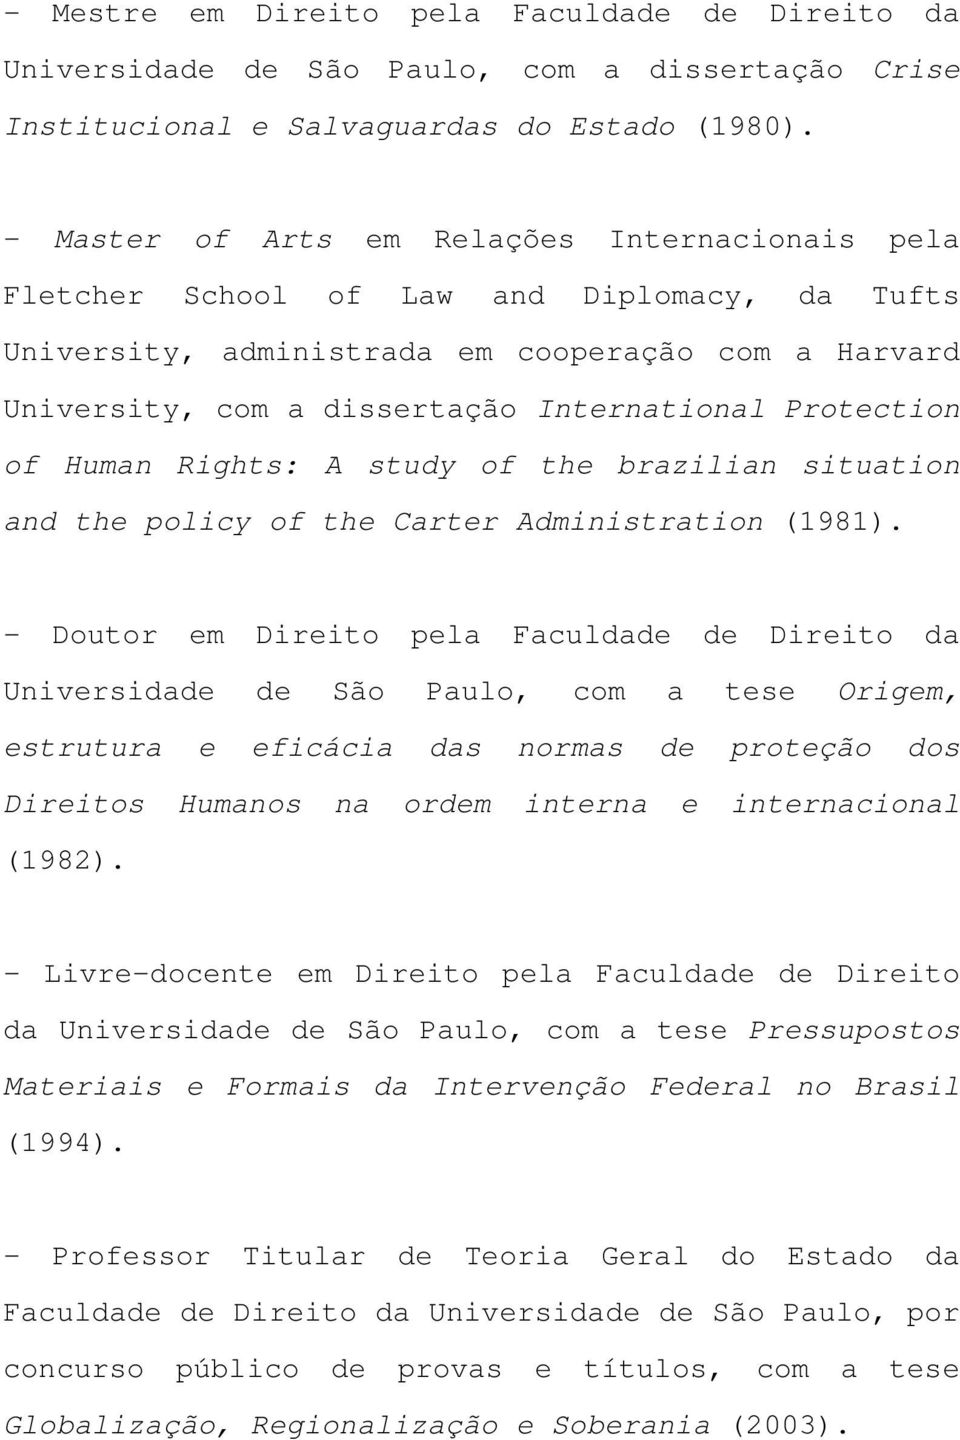 Protection of Human Rights: A study of the brazilian situation and the policy of the Carter Administration (1981).